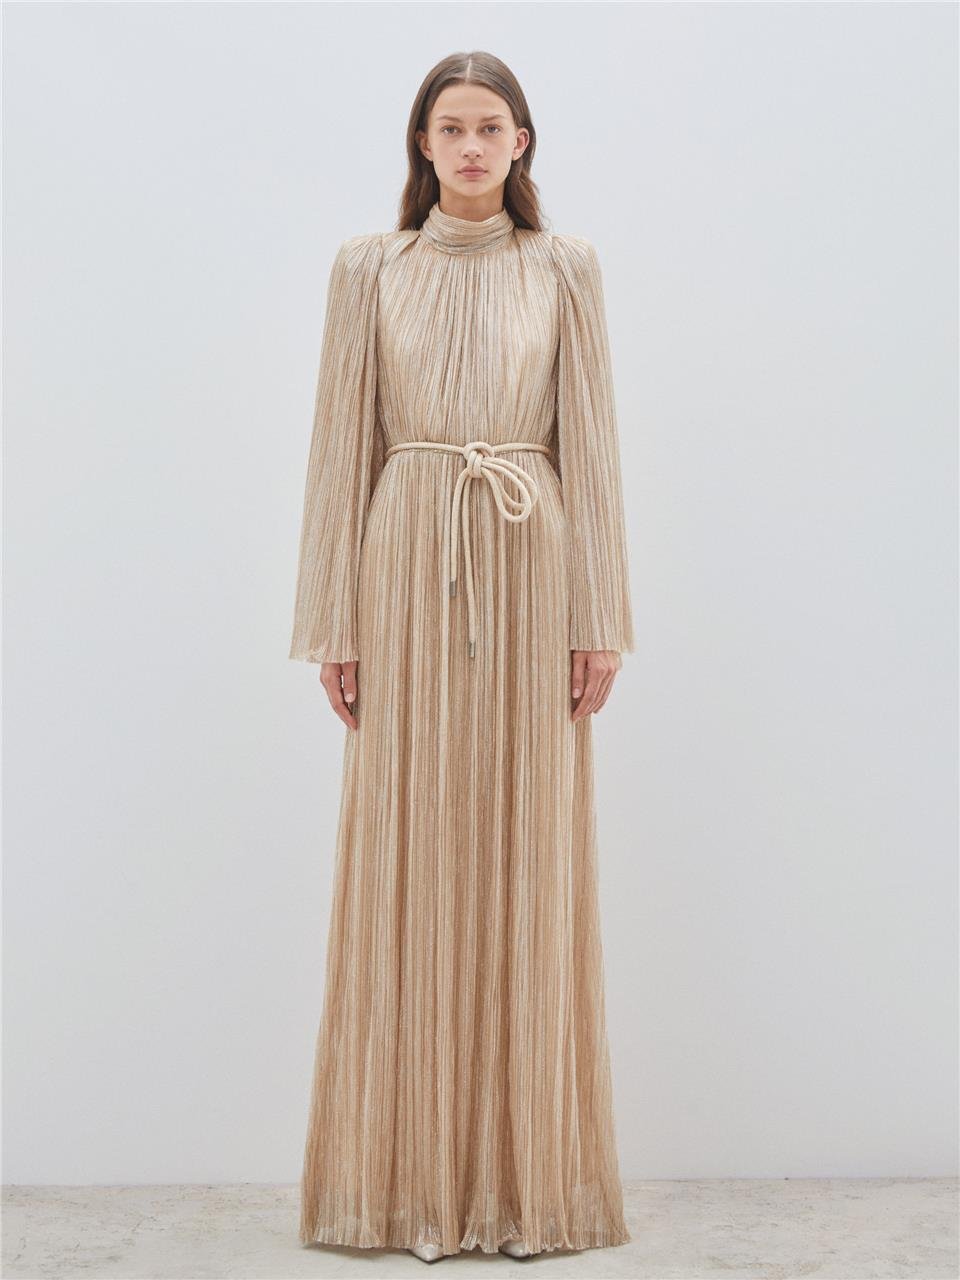 Pleated Gold Color Dress